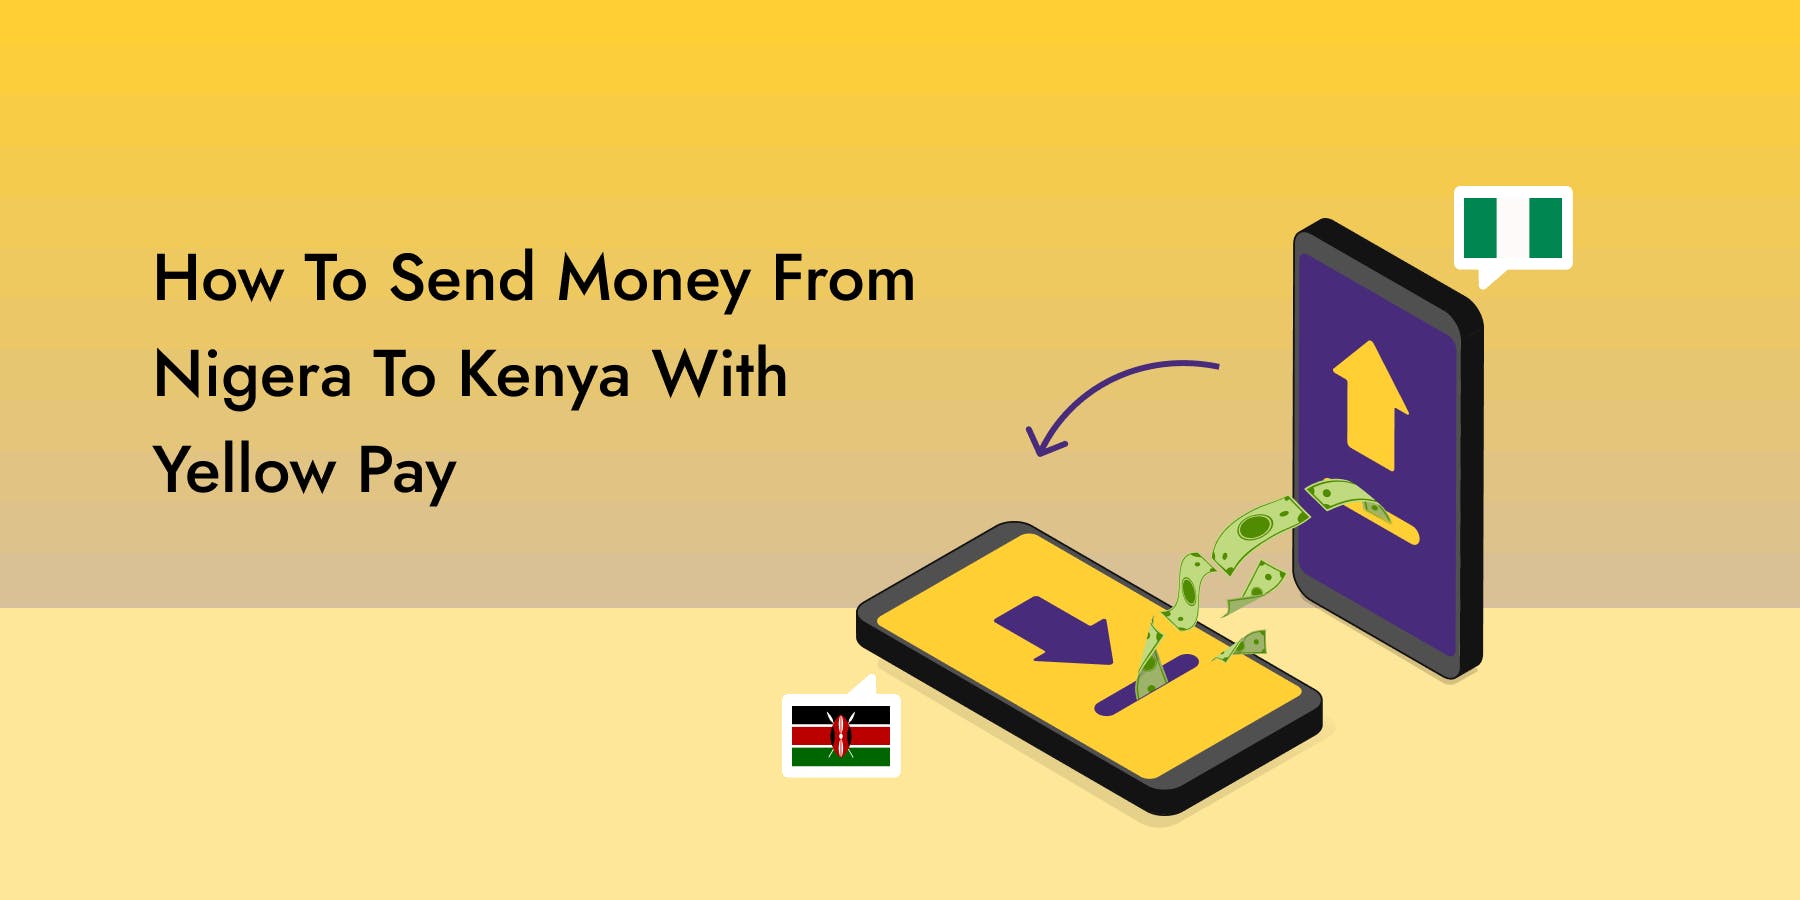 How To Send Money From Nigeria to Kenya With Yellow Pay